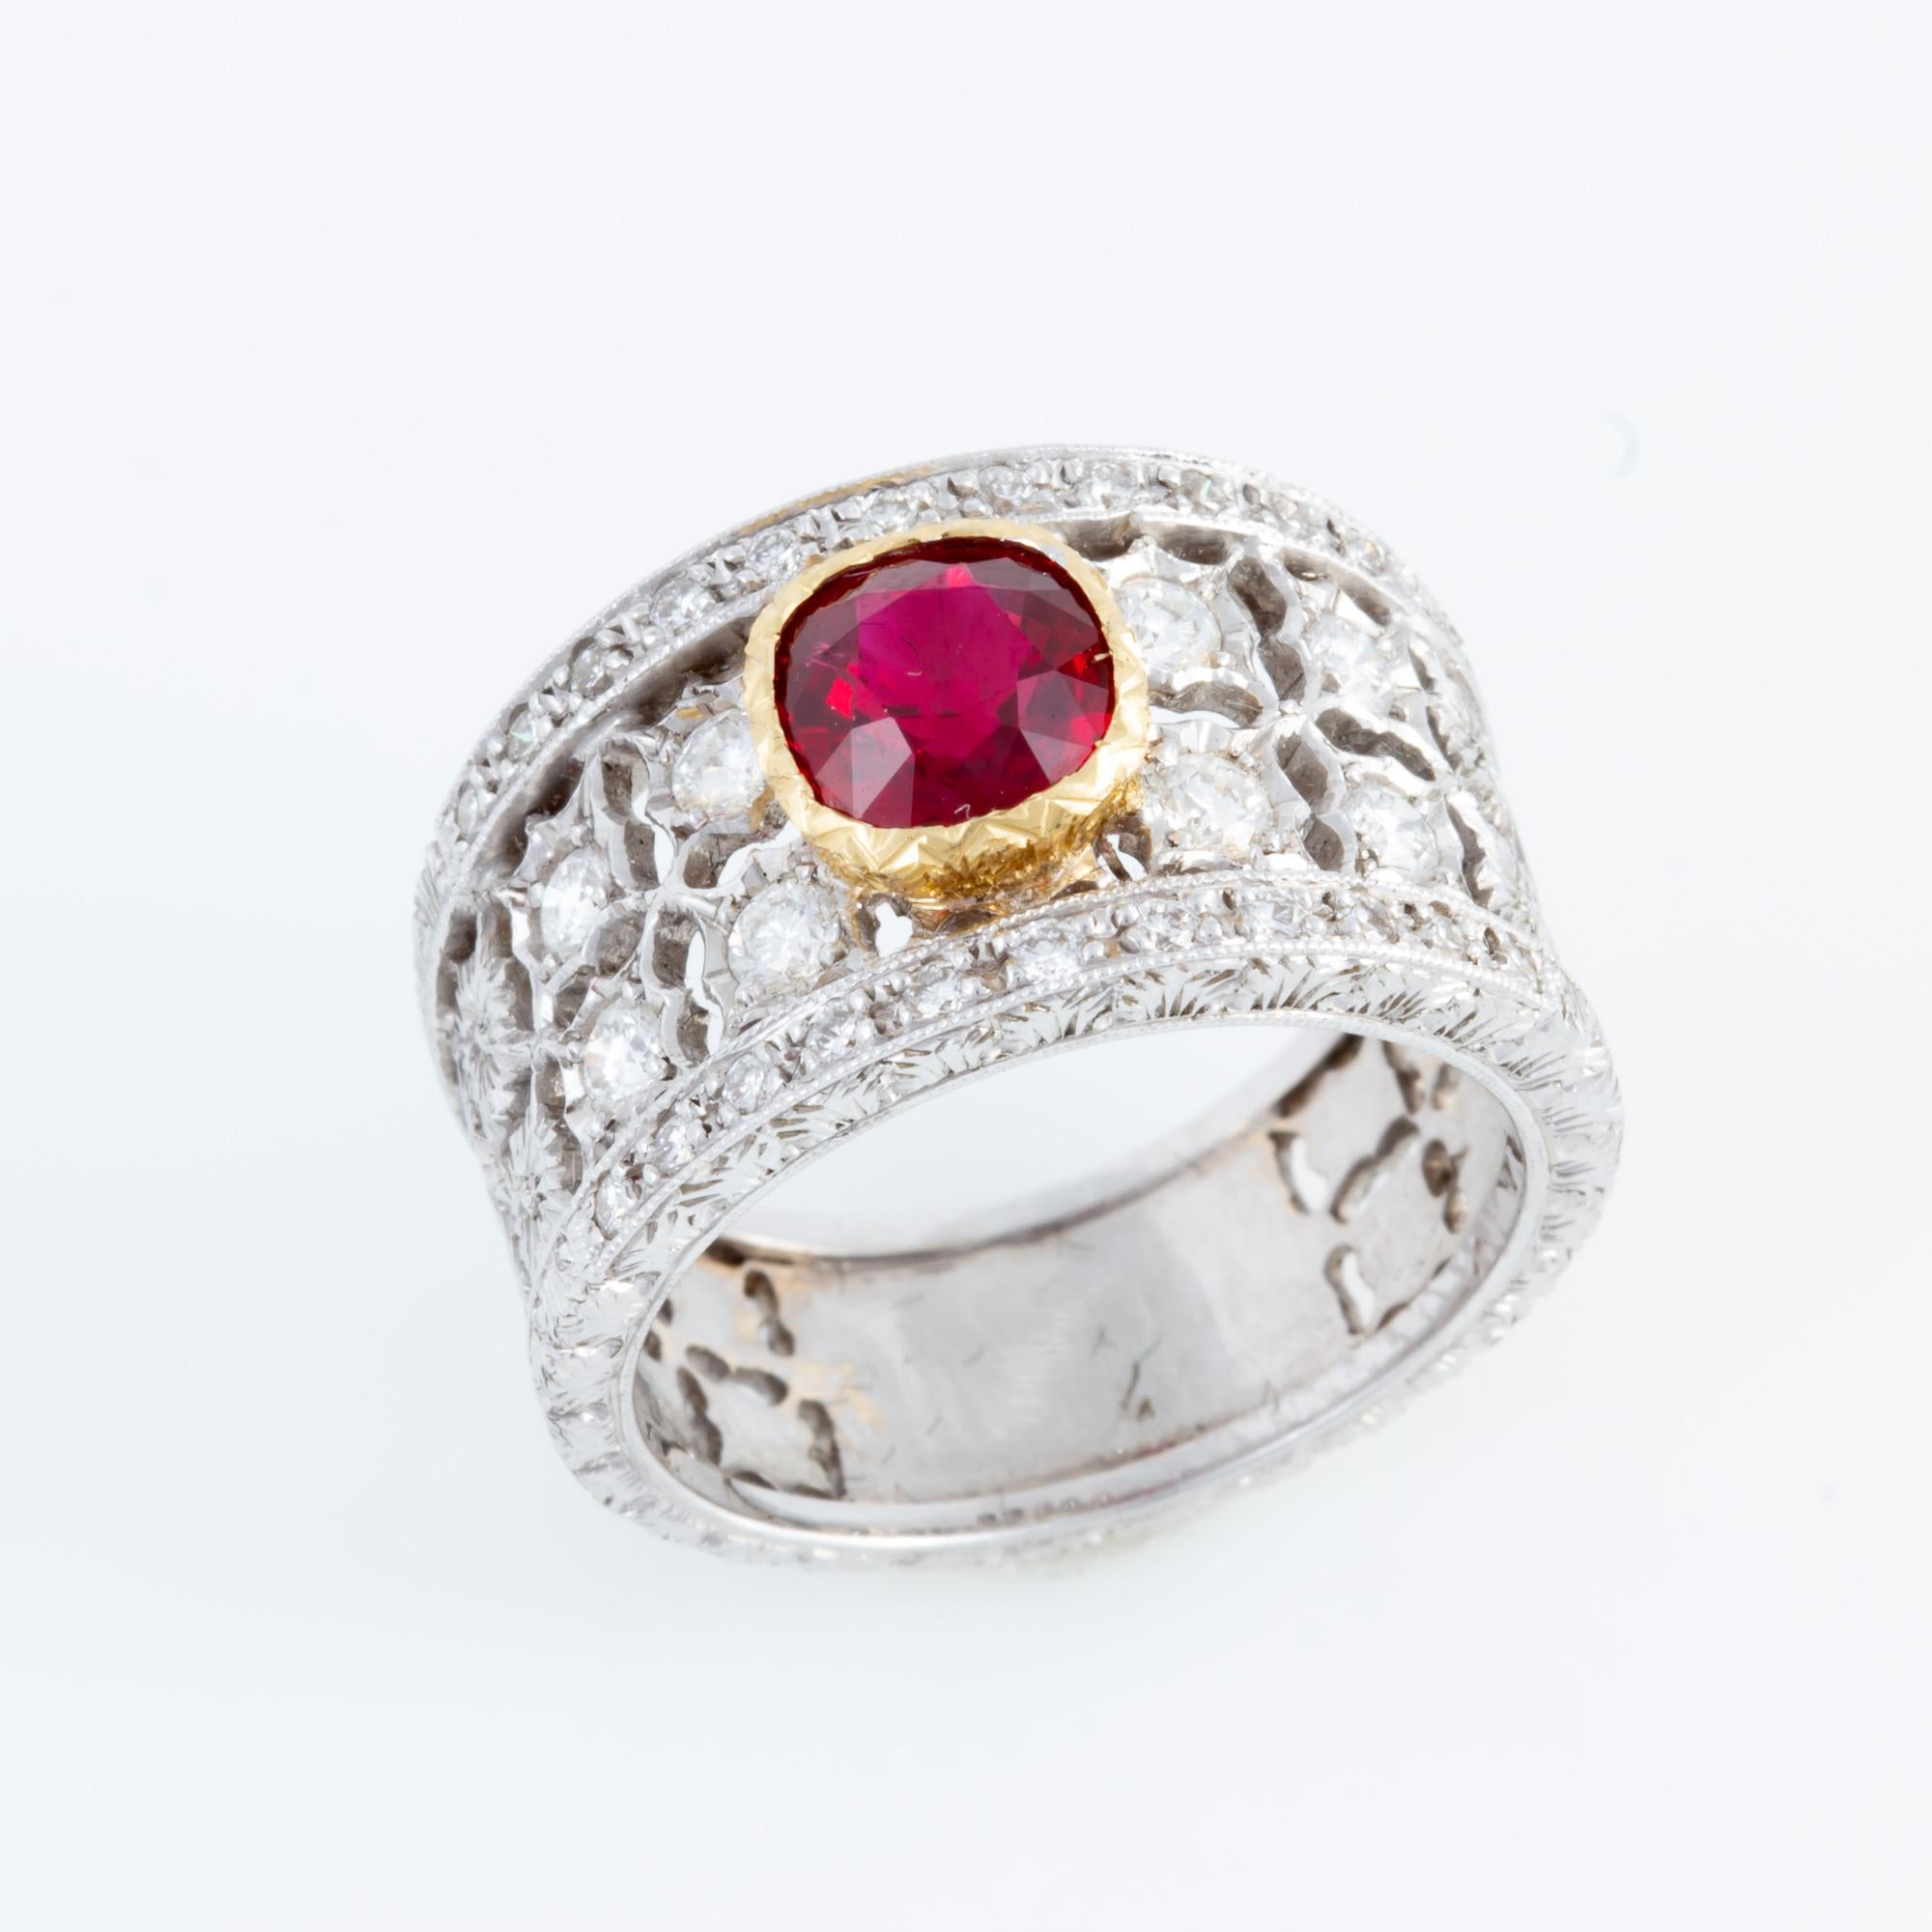 Spectacular Italian Florentine Engraved Ruby and Diamond 18 karat Ring For Sale 1